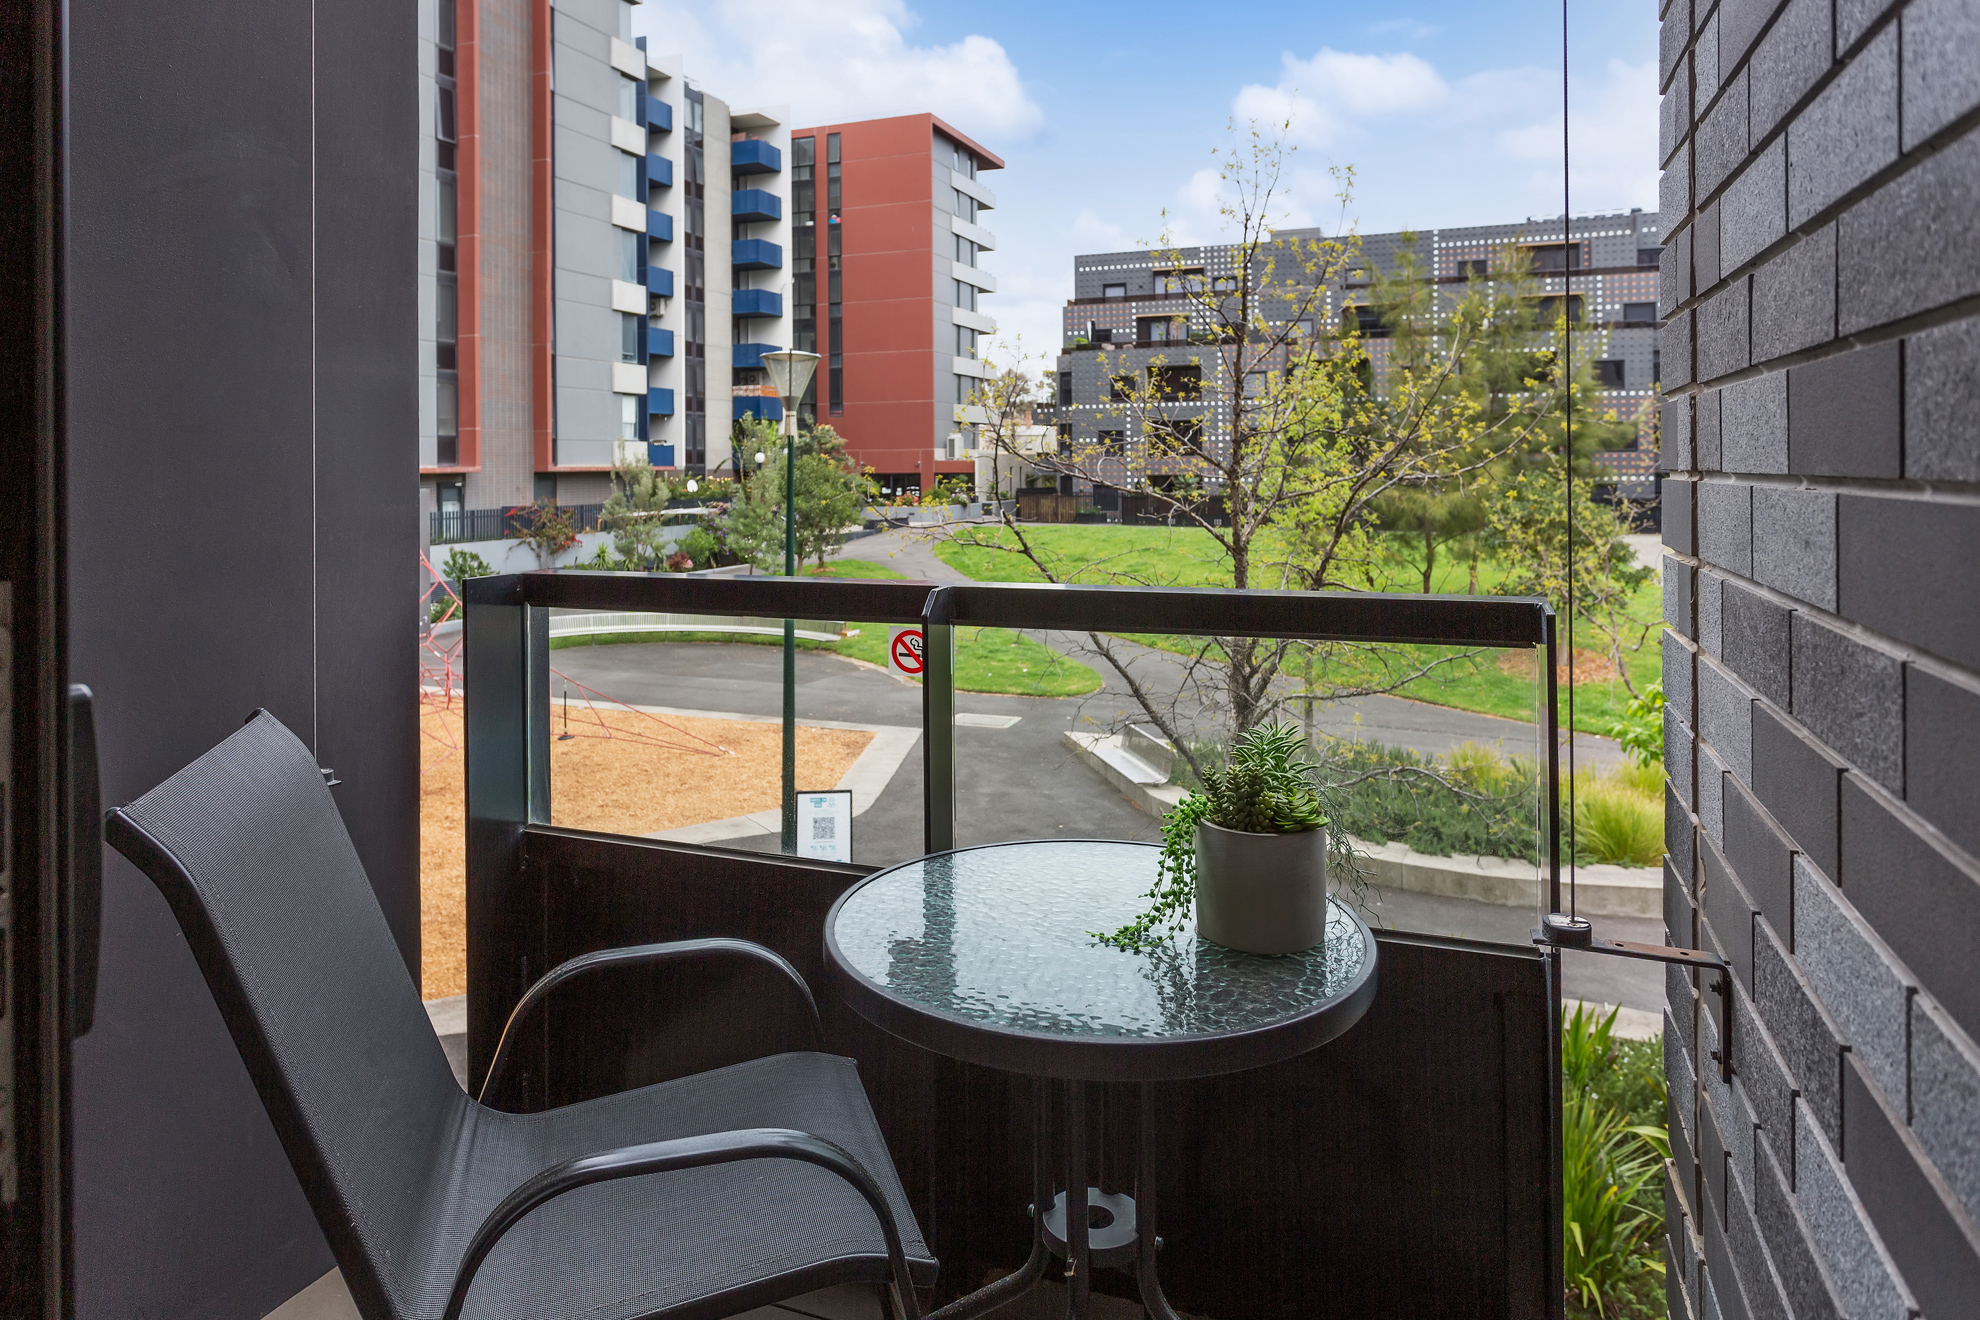 Balcony - One Bedroom Apartment - Urban Rest- Palmerston Street Apartments Melbourne